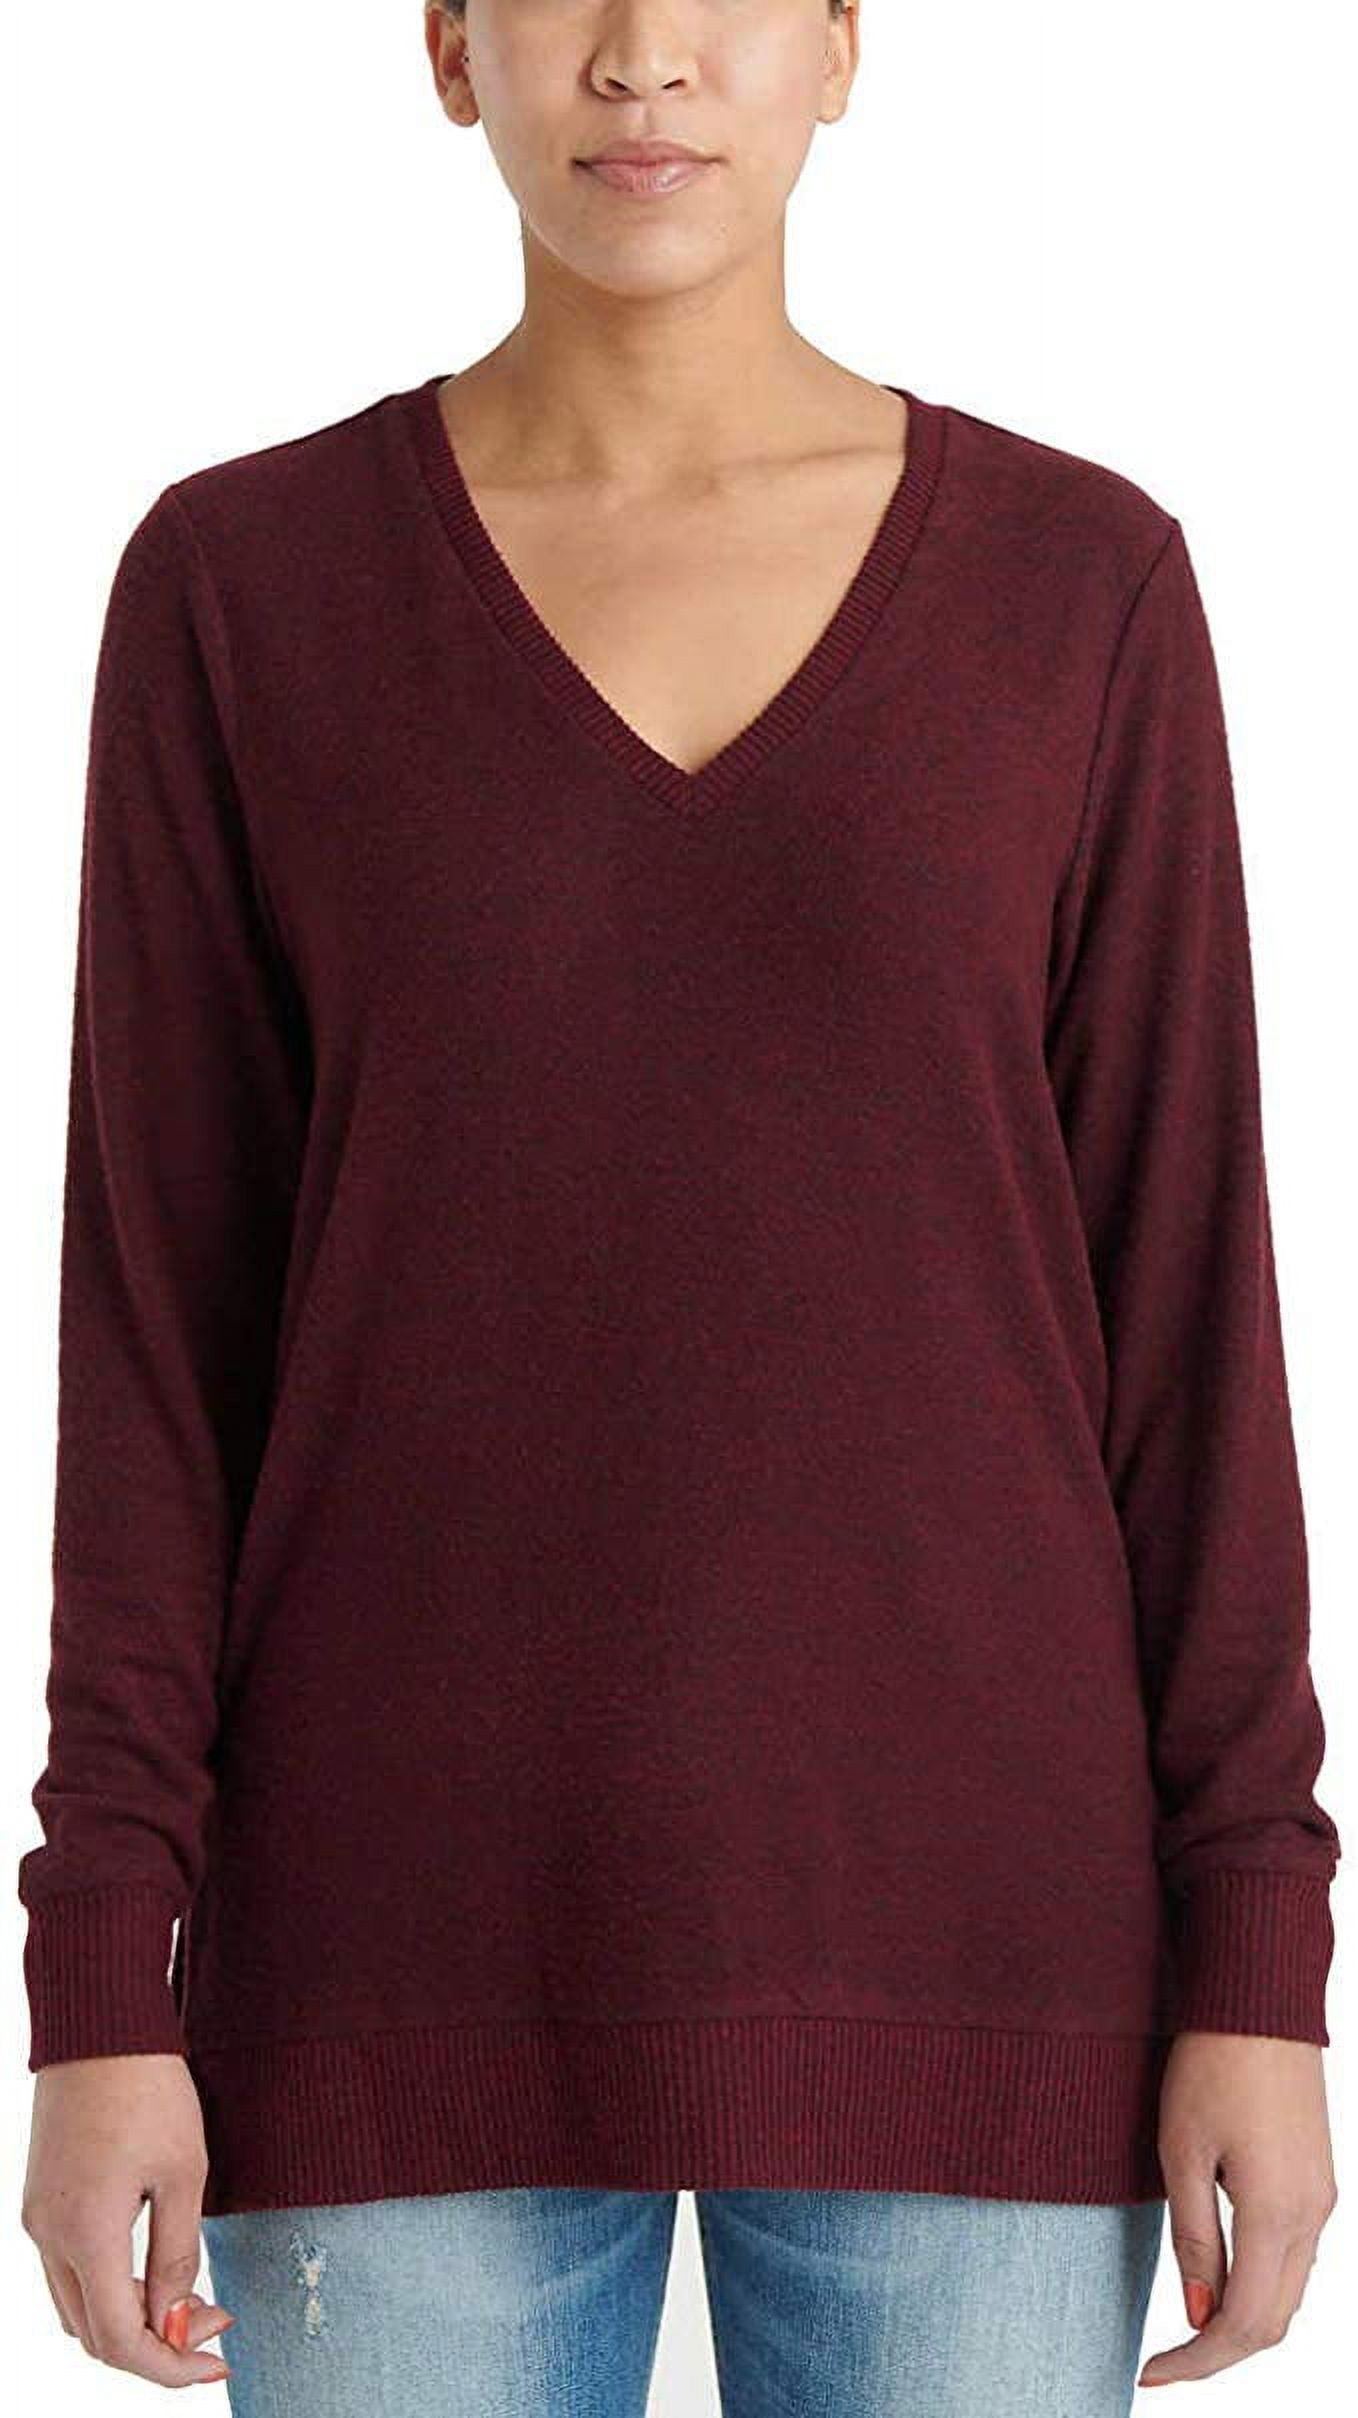 Lucky Brand Ladies' V-Neck Tunic Long Sleeves Pullover Light Sweater Wine M  